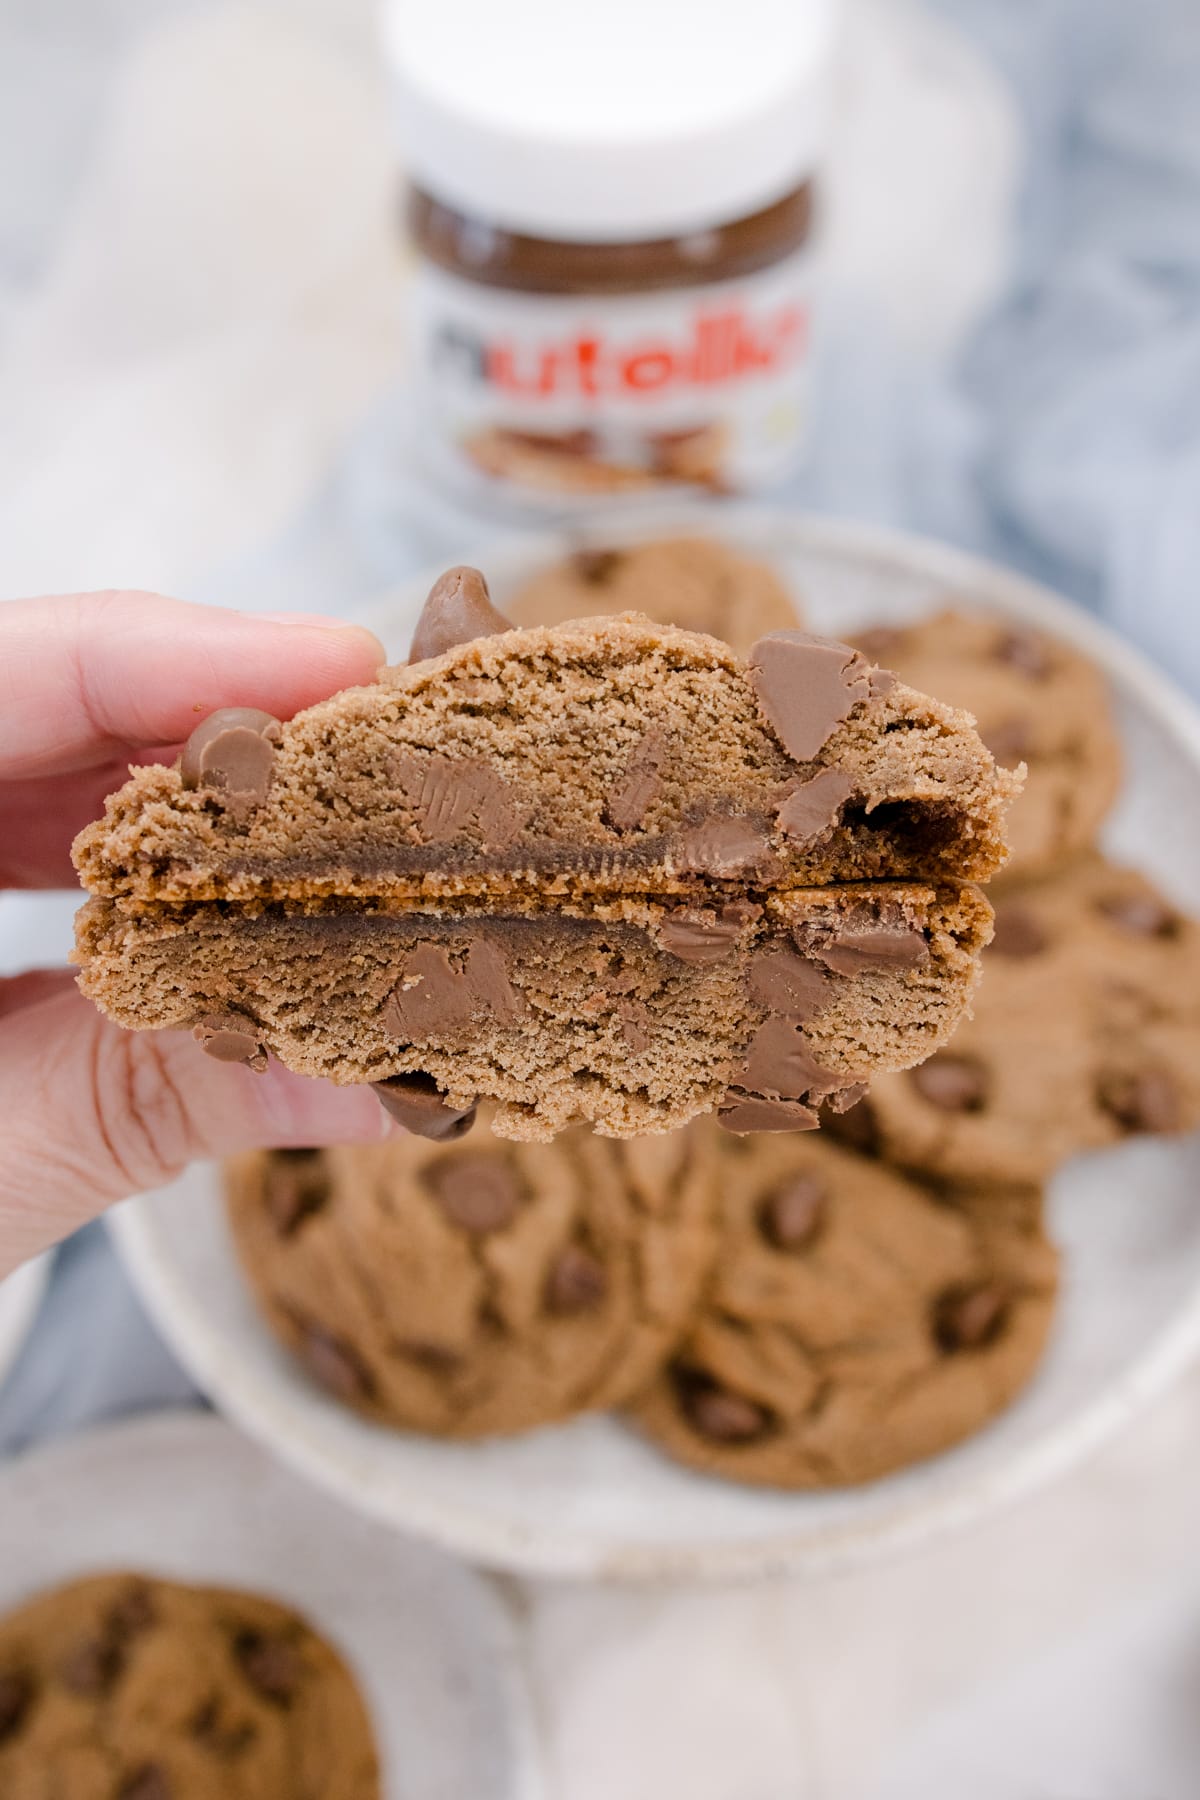 Close up of someone holding up a Nutella Cookie that has been sliced in half to reveal the middle.